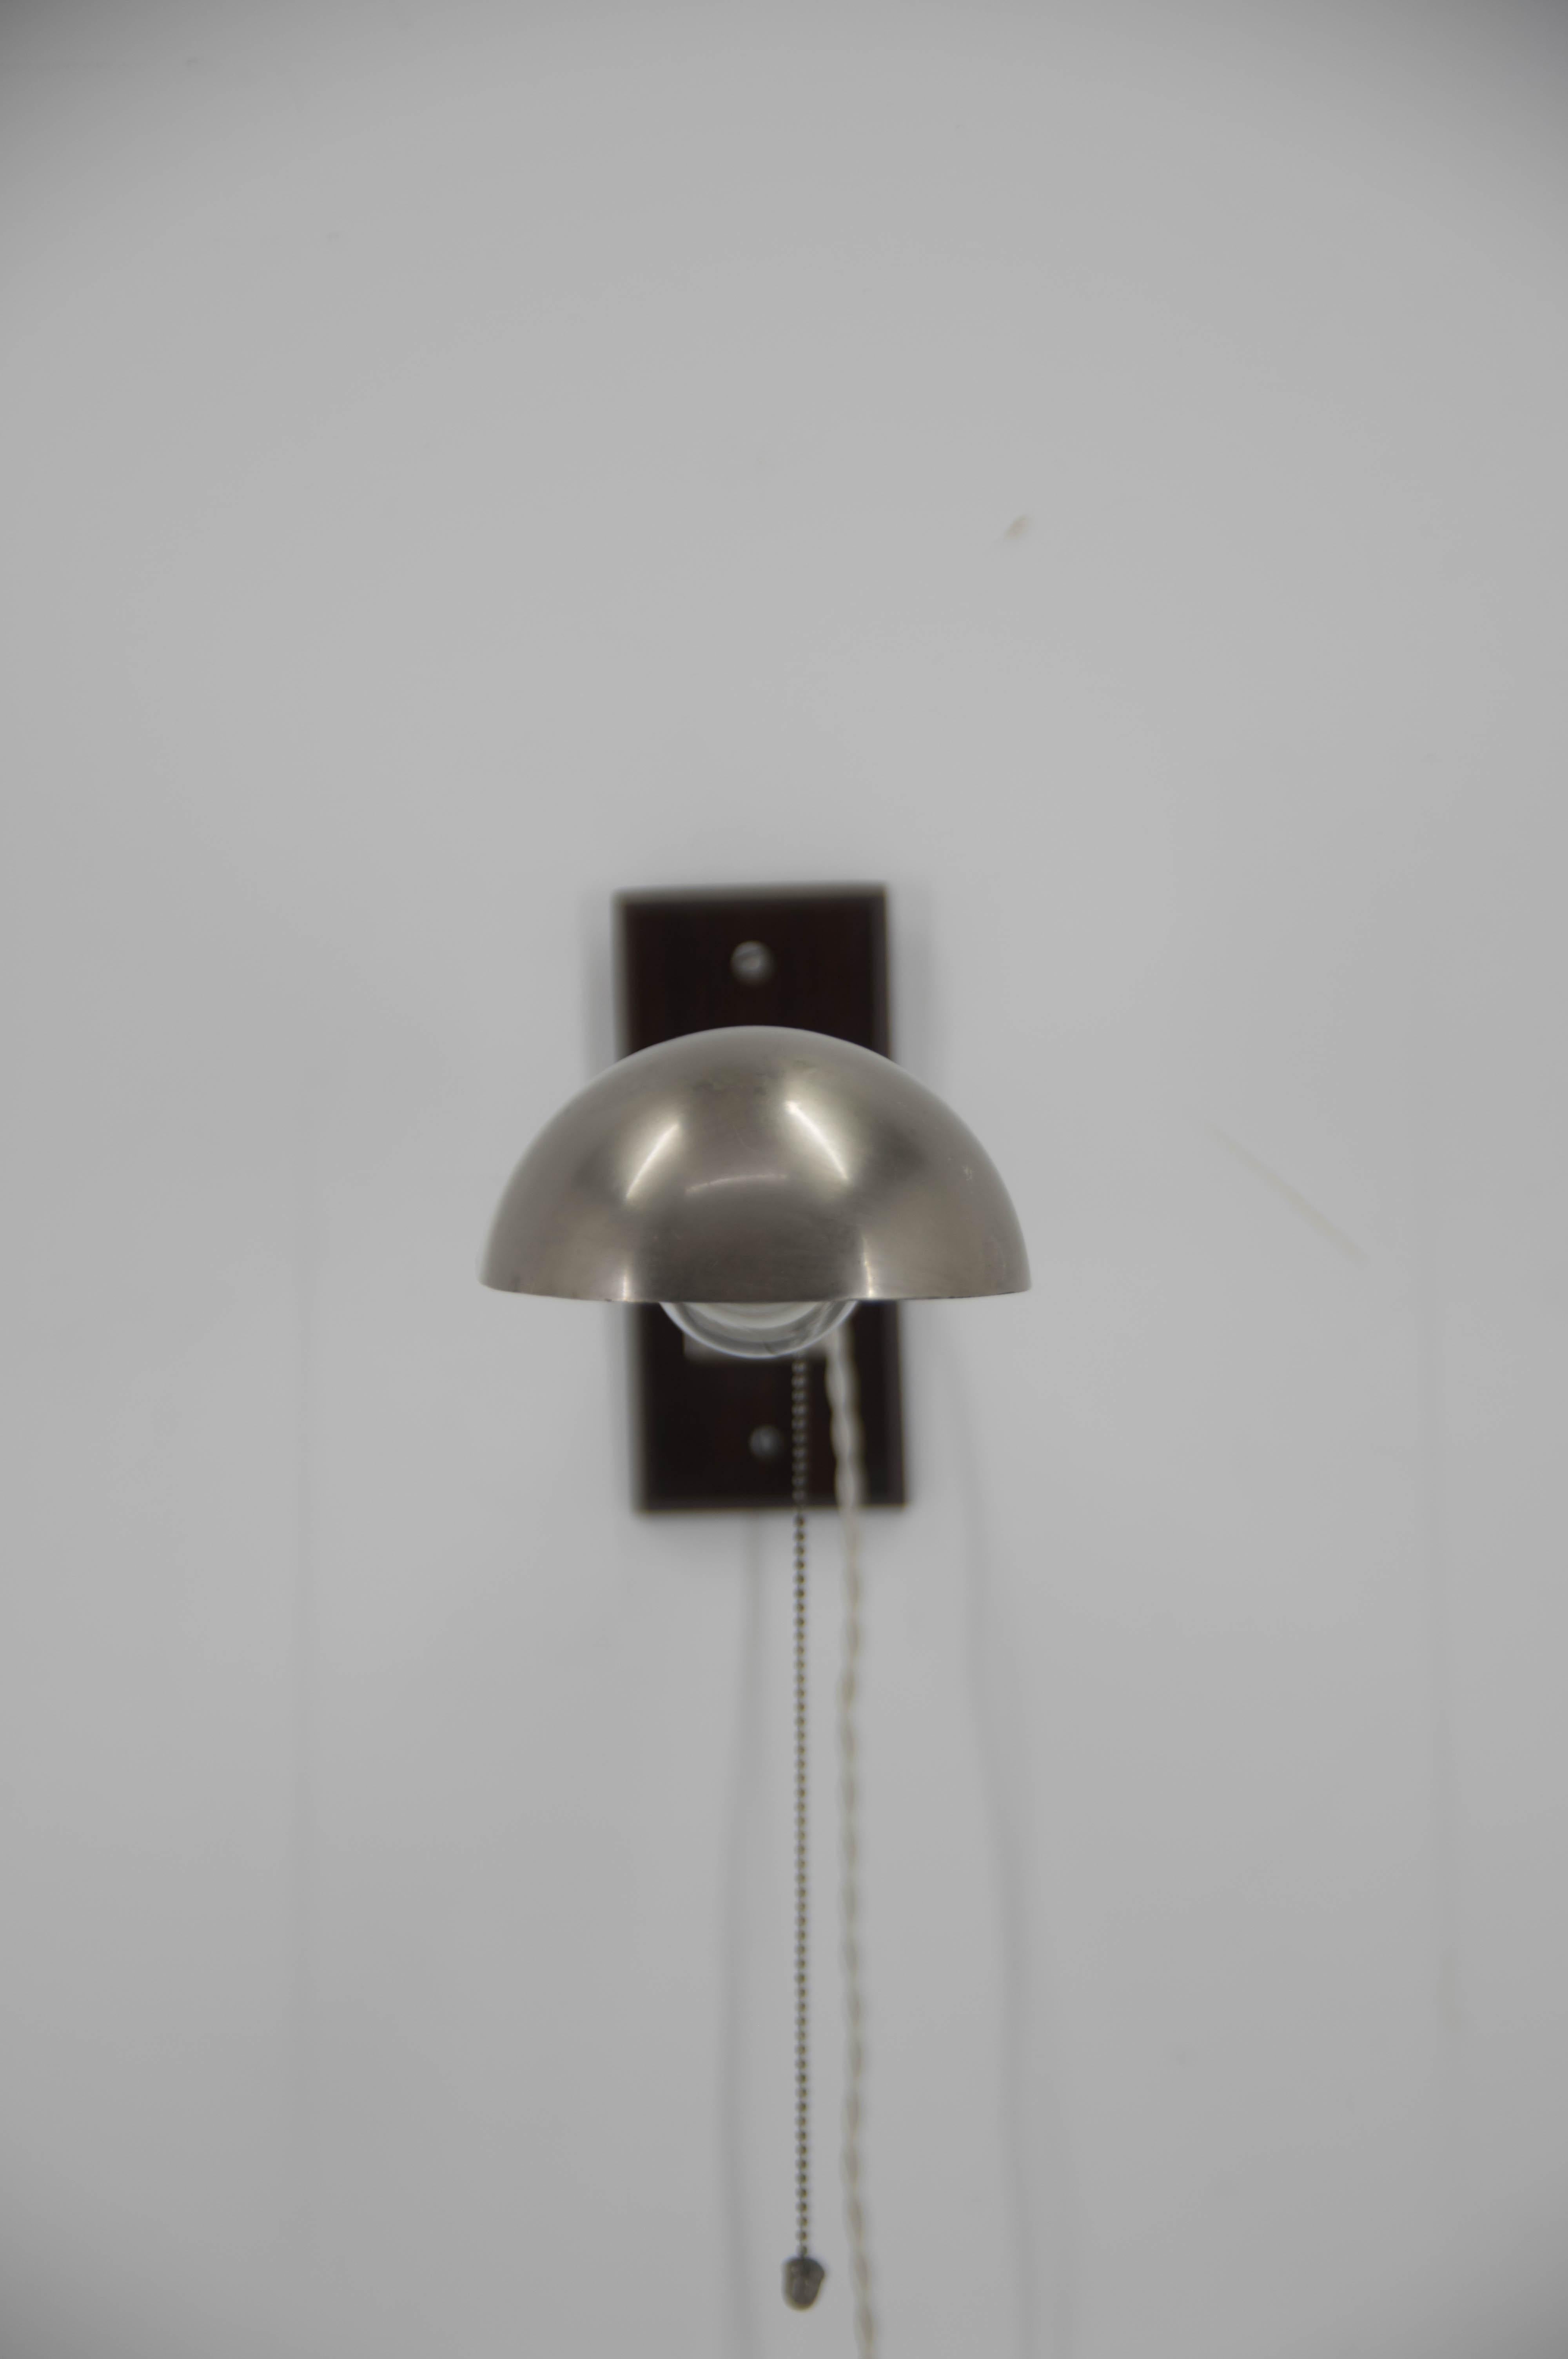 Rare Functionalist Wall Lamp with Rotating Shade, 1920s For Sale 5